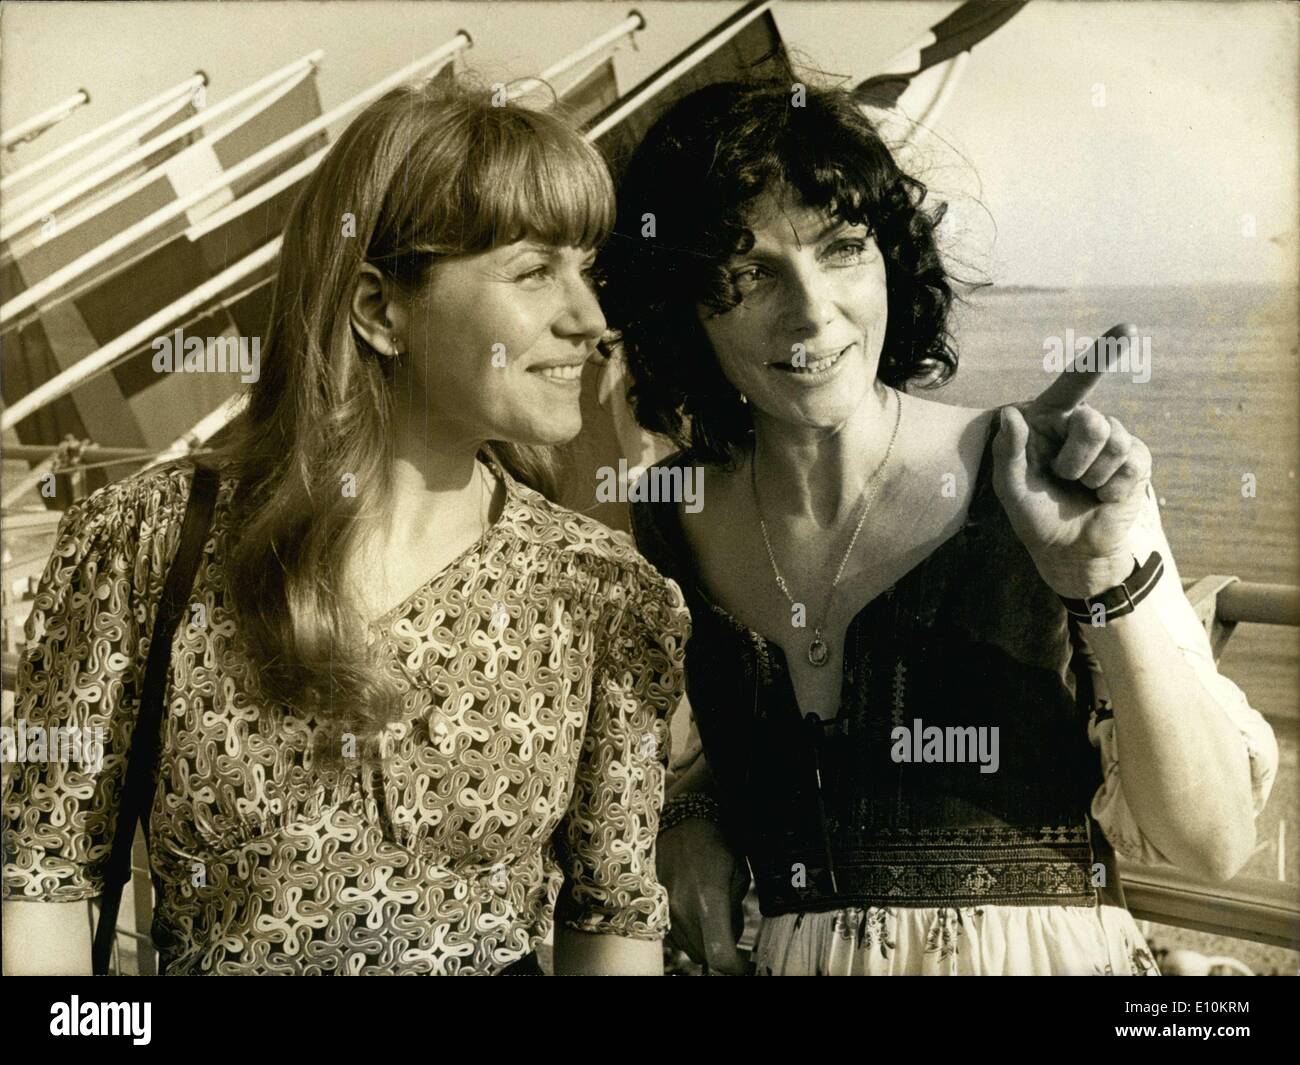 May 16, 1973 - Comedians Cecile Vassort and Rosine Rochette in Cannes Stock Photo